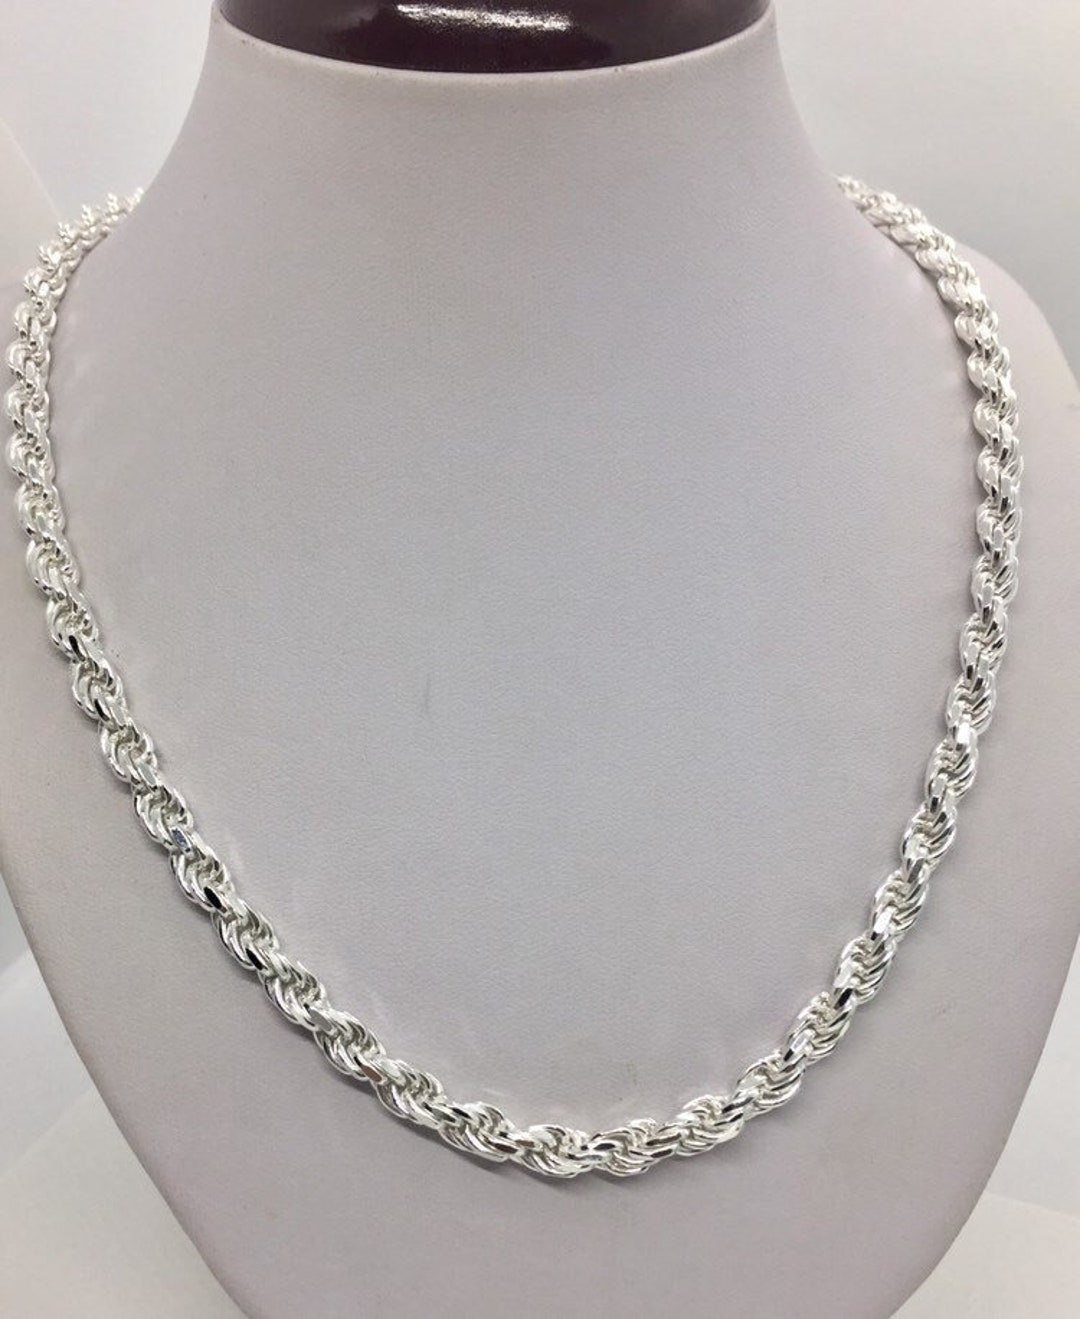 6mm 925 Sterling Silver Men's Women's Solid Rope Chain - Etsy